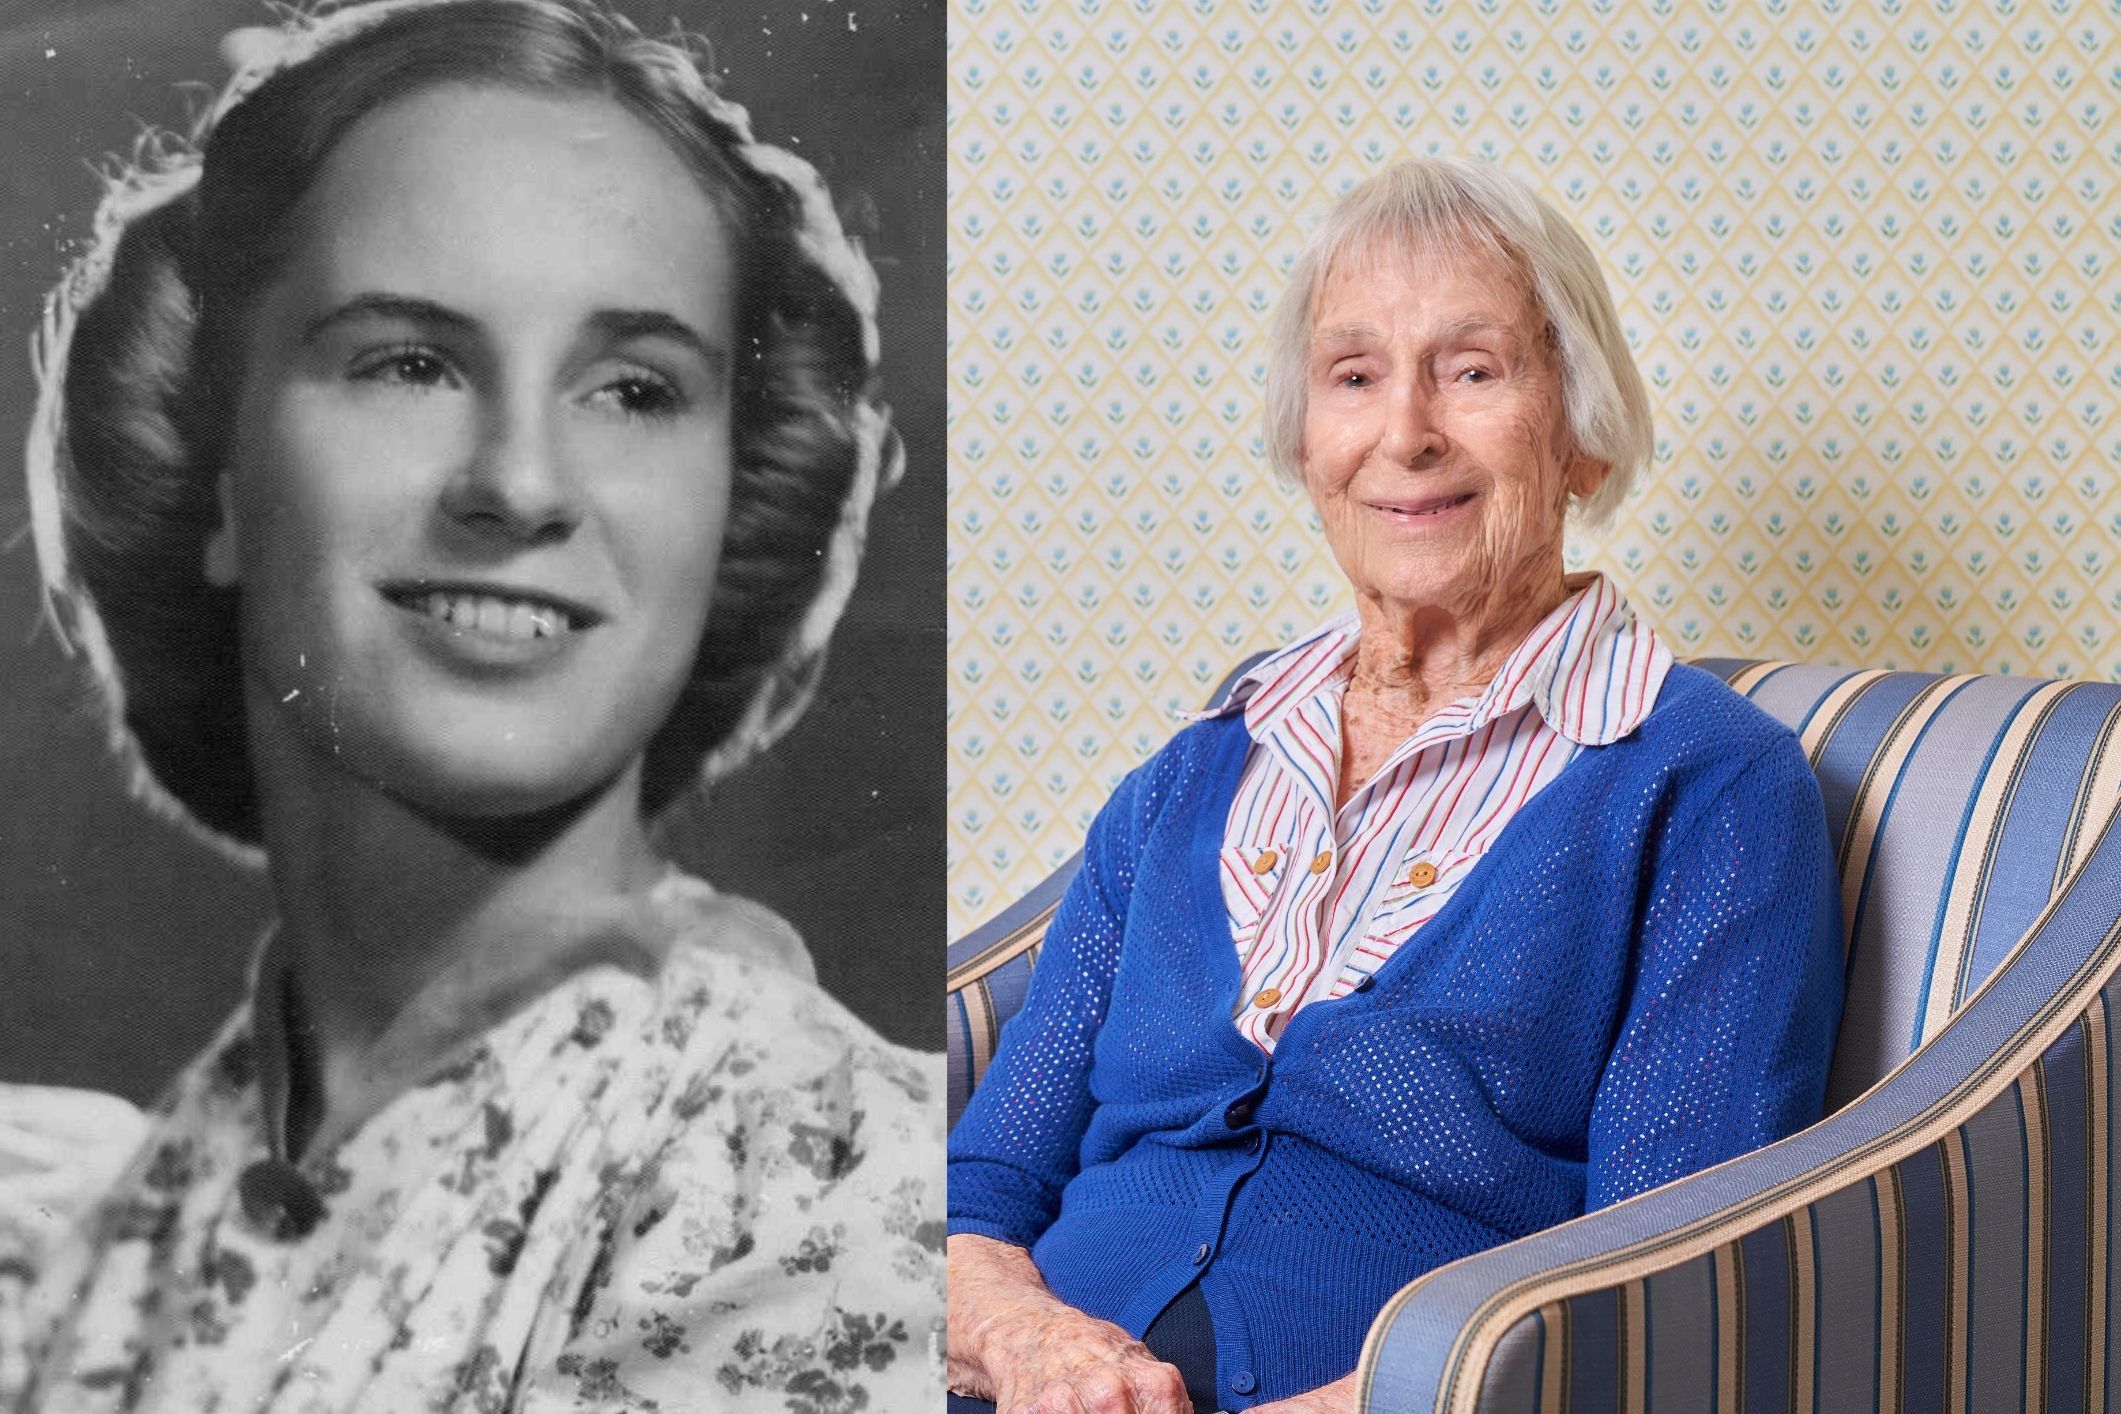 Australian aged care resident reflects on 100 years of wonderful life on her birthday